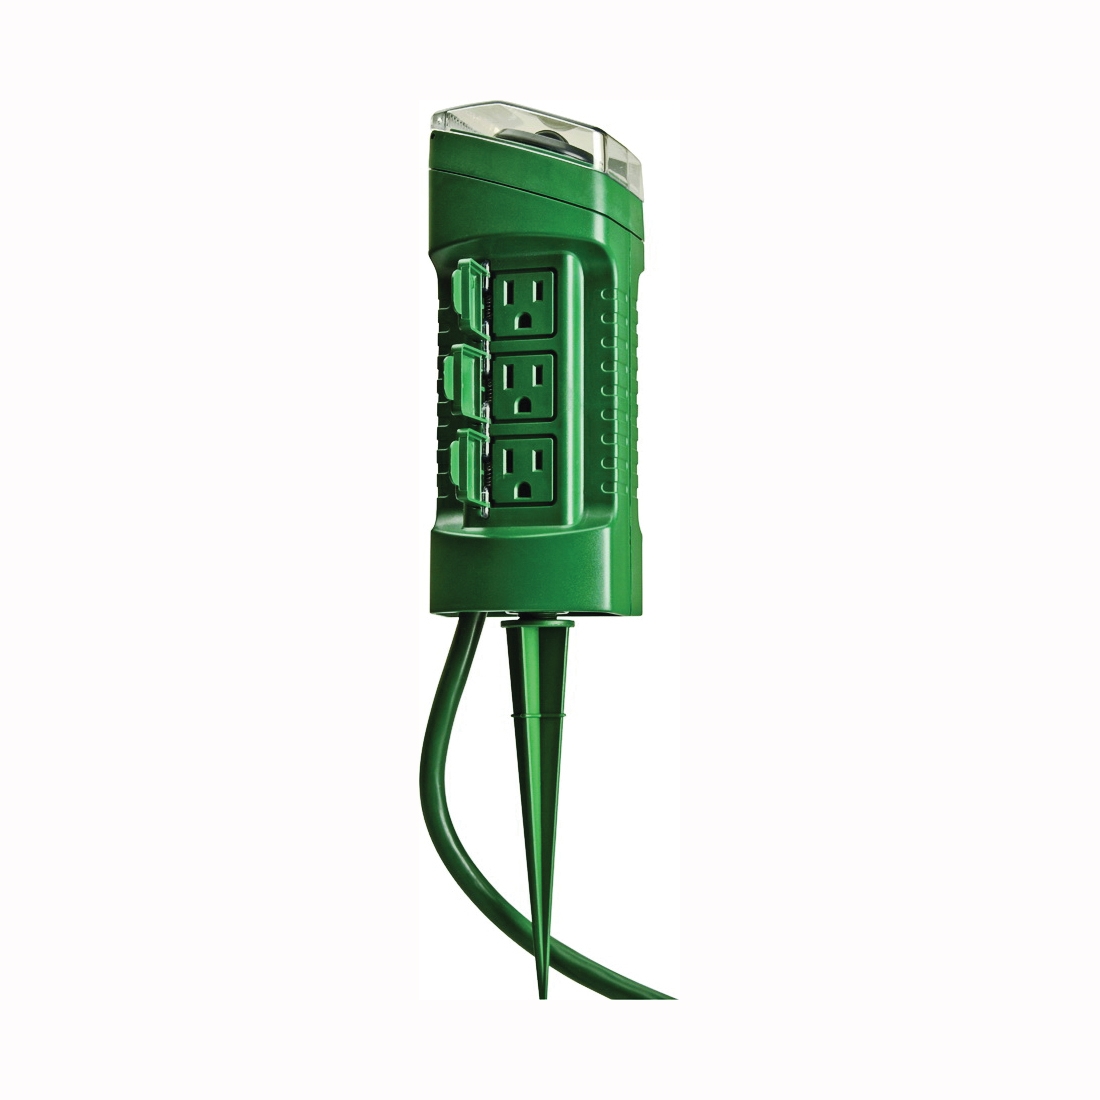 CCI 13547 Power Stake, 15 A, 125 V, 1875 W, 6 -Outlet, Green